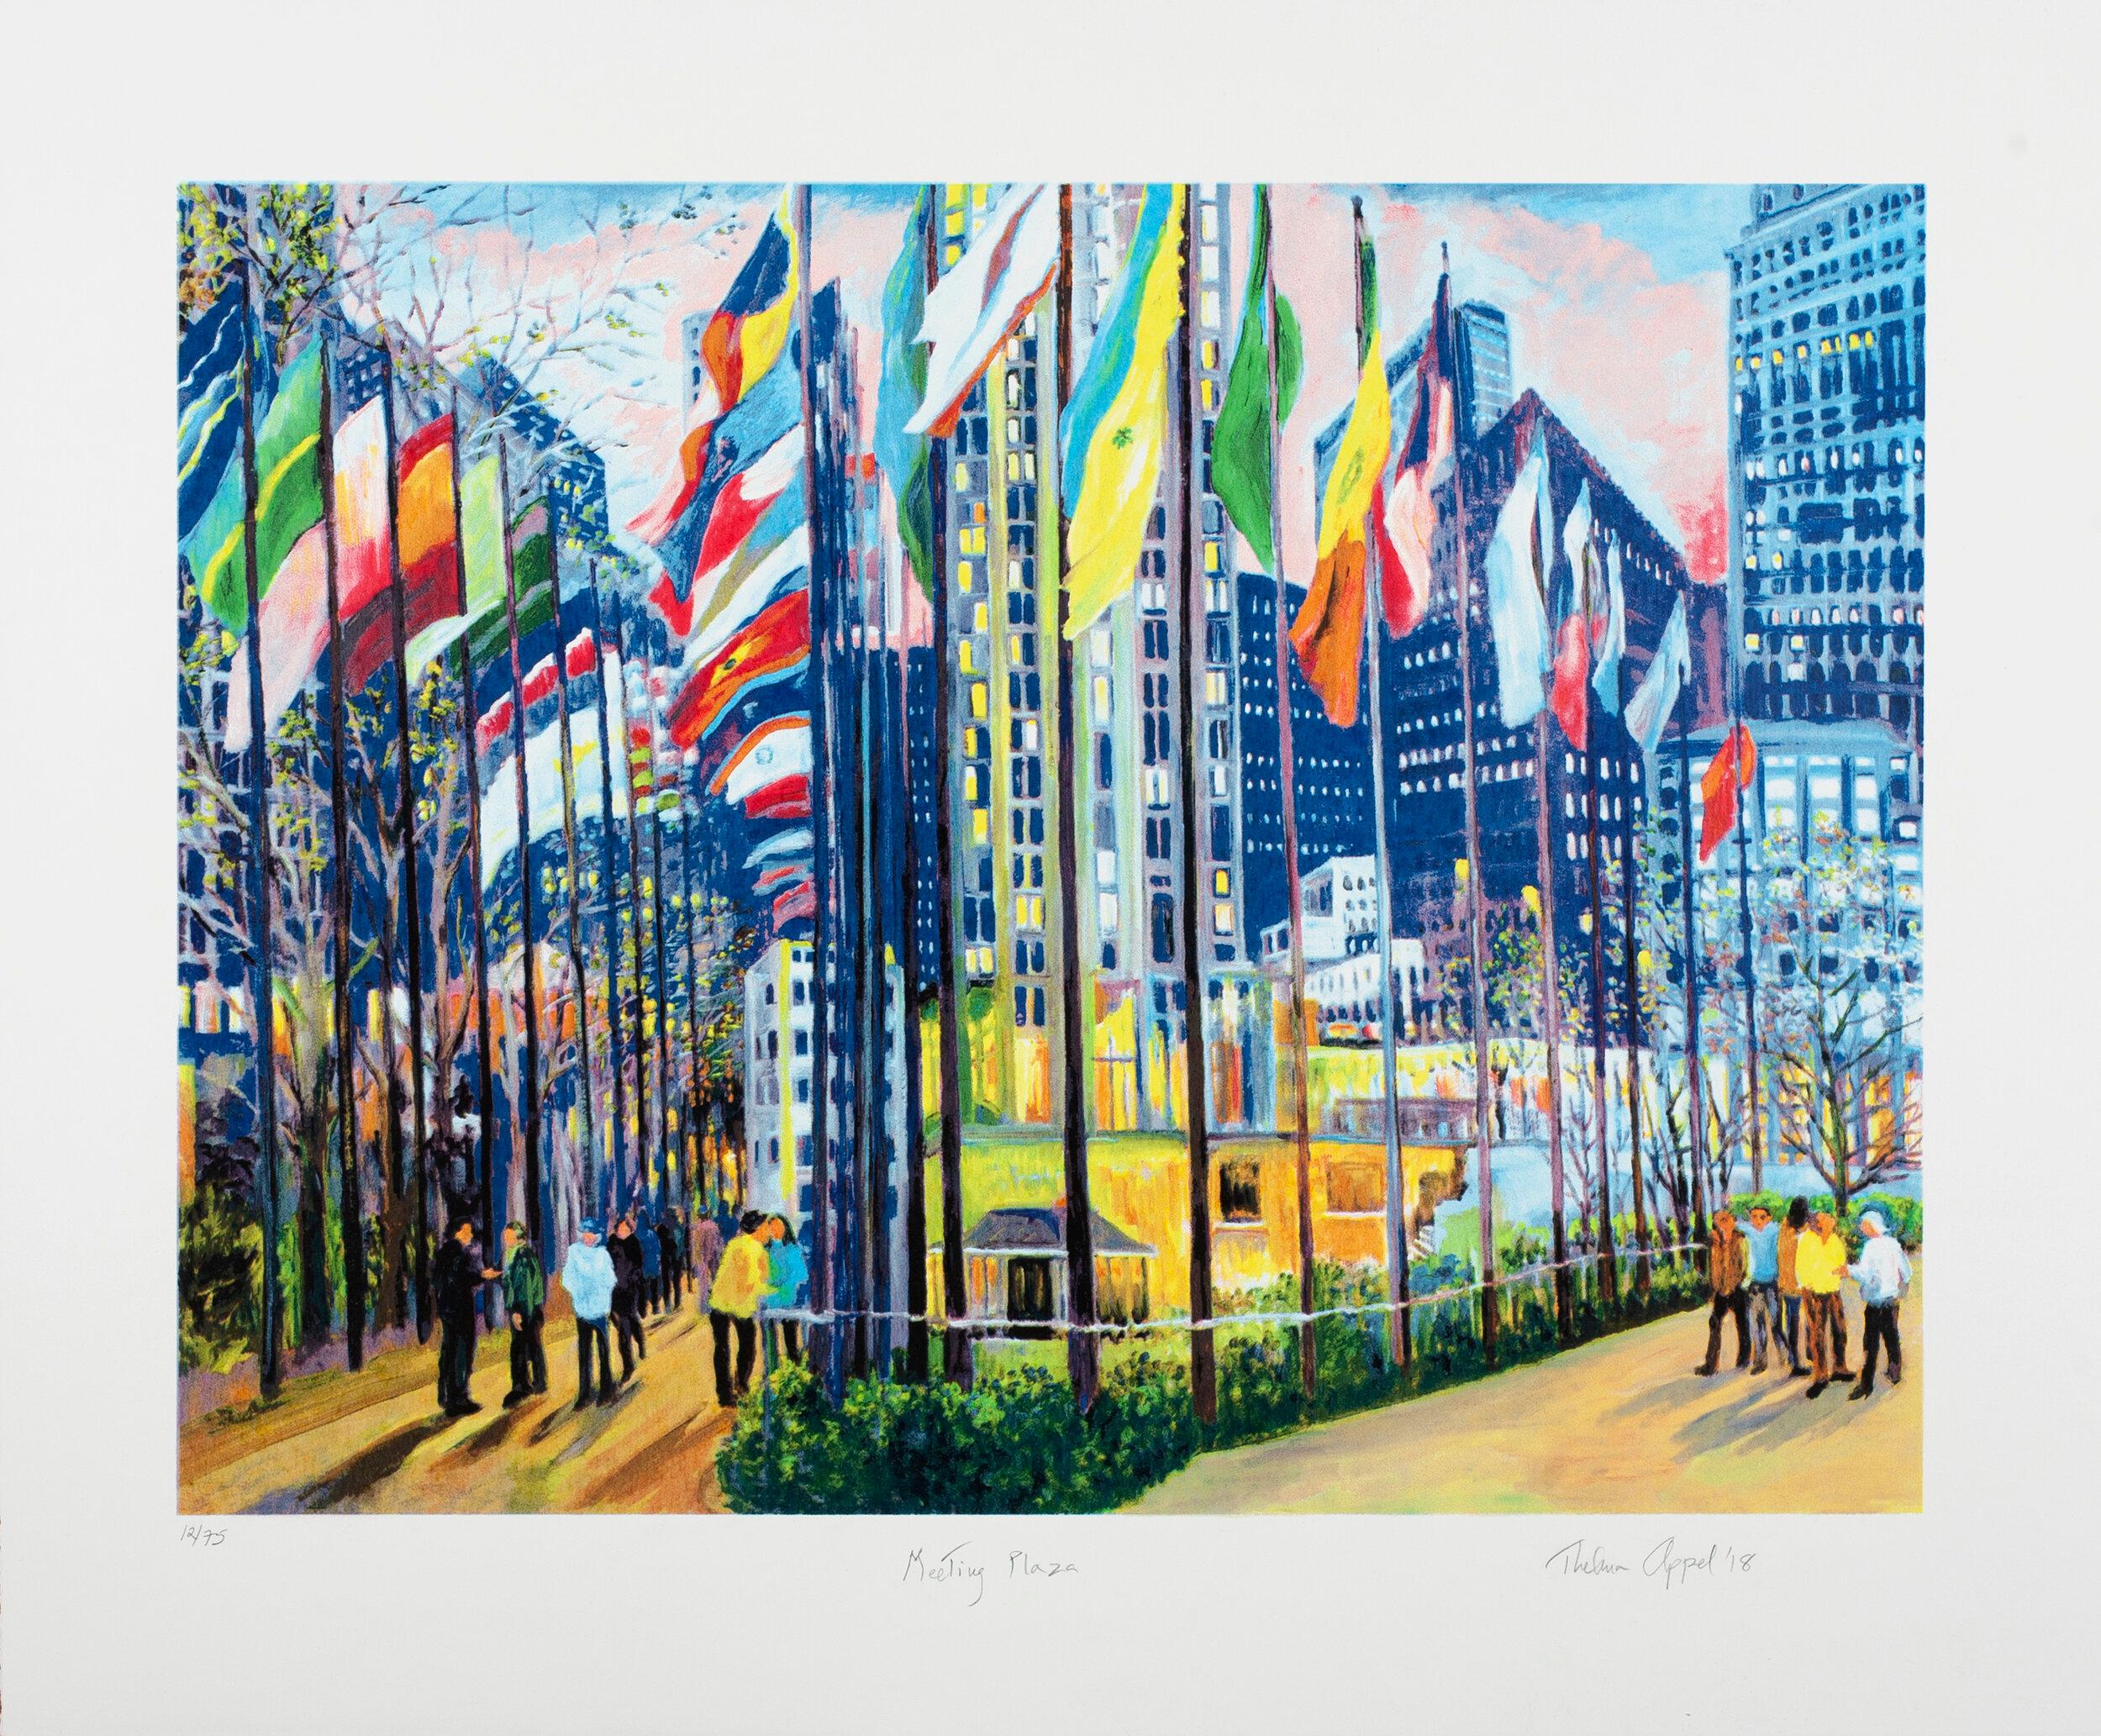 Thelma Appel Figurative Print - Meeting Plaza, Signed/N 25-color silkscreen, Rockefeller Ctr NY & United Nations